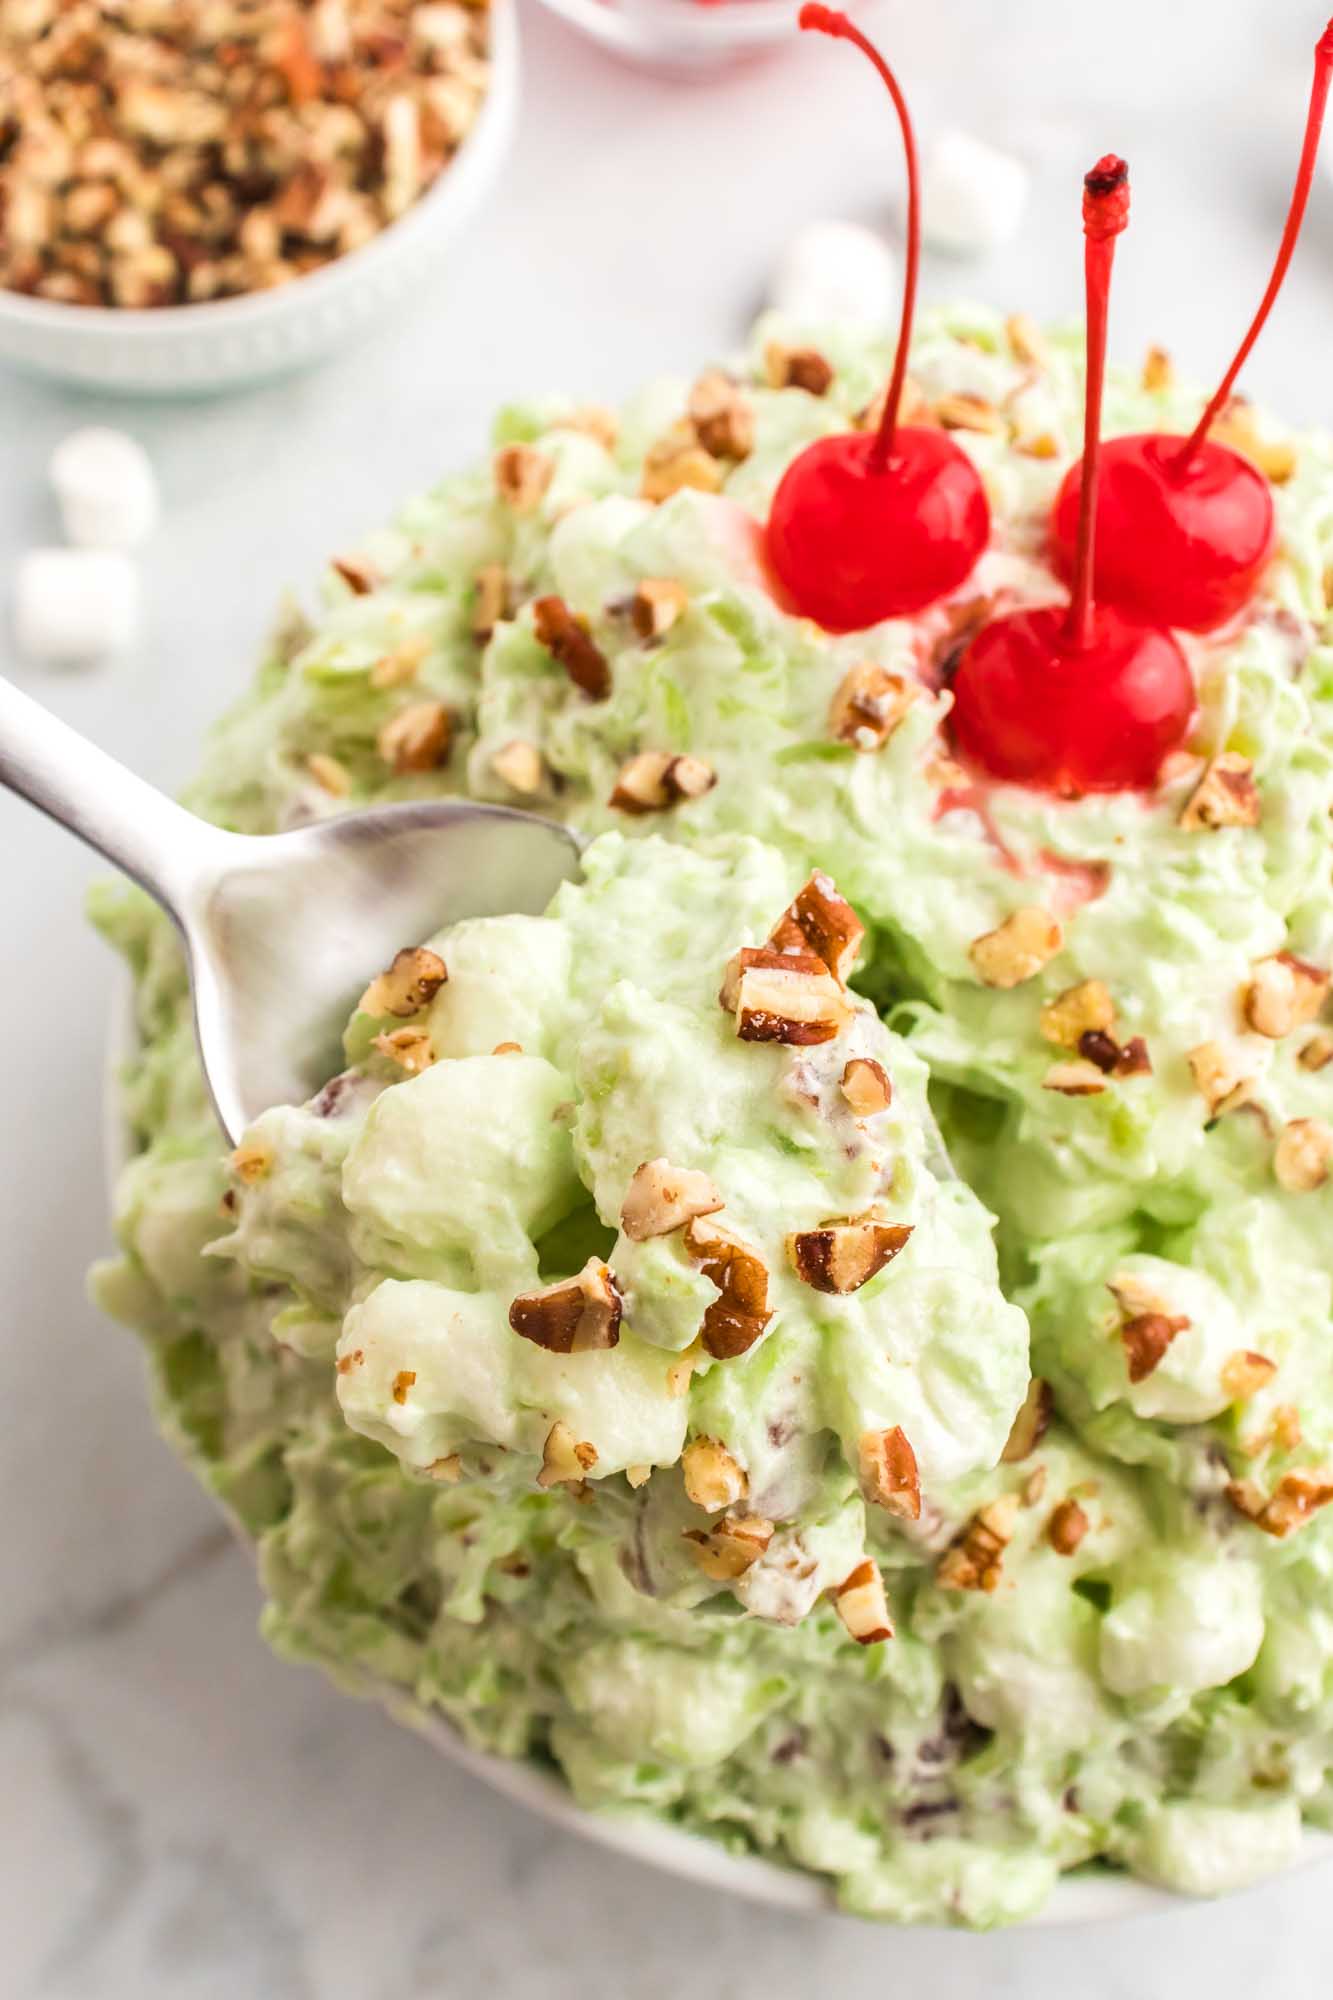 Eating watergate salad with a spoon